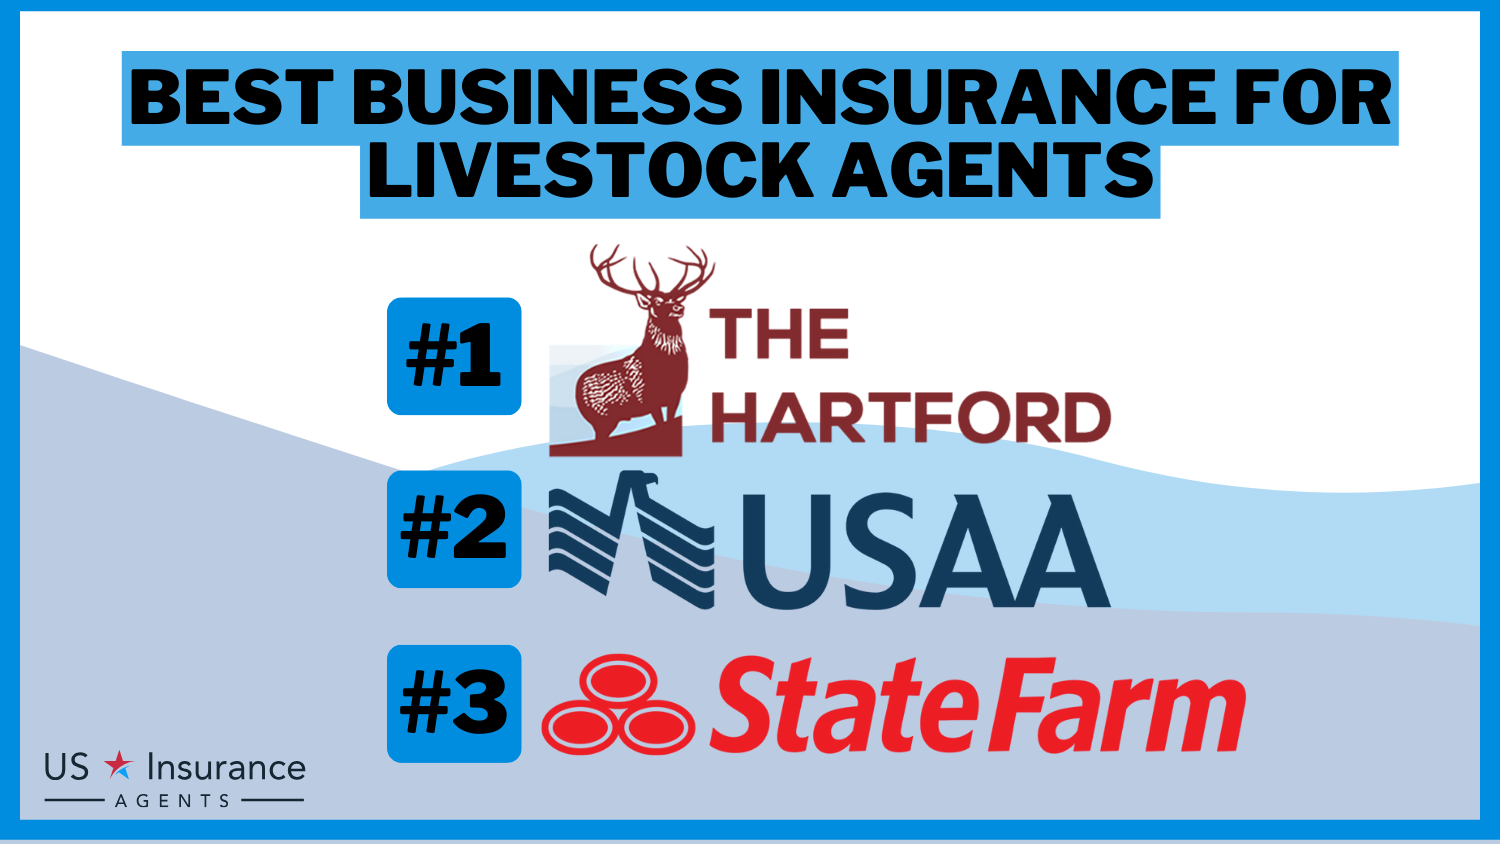 Best Business Insurance for Livestock Agents: The Hartford, USAA and State Farm.